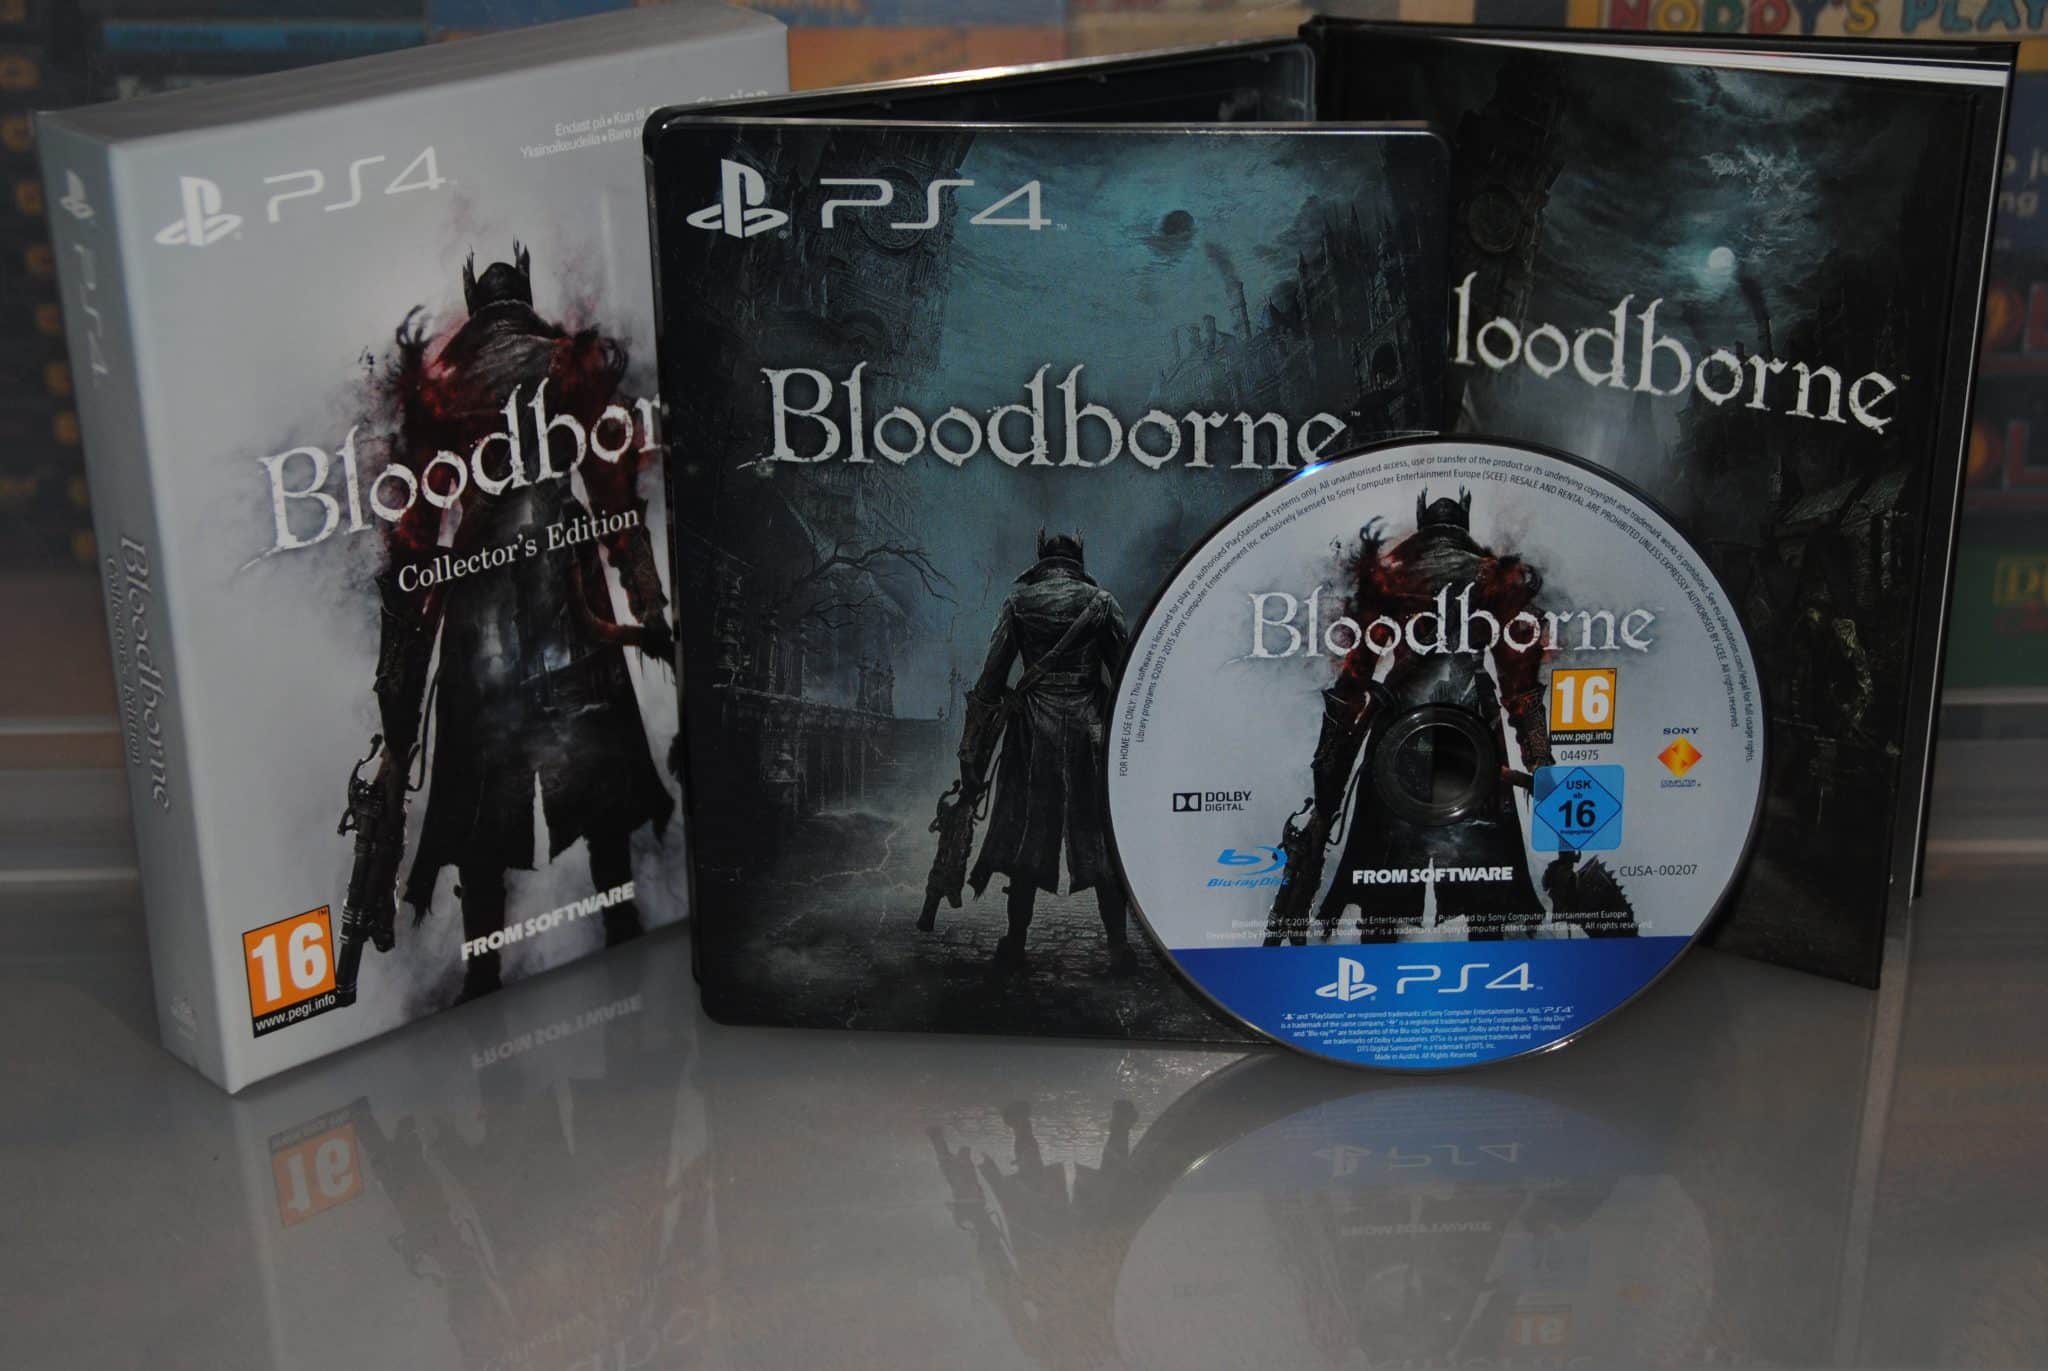 A Look At The Two Bloodborne Collector's Editions • AmigaGuru's 